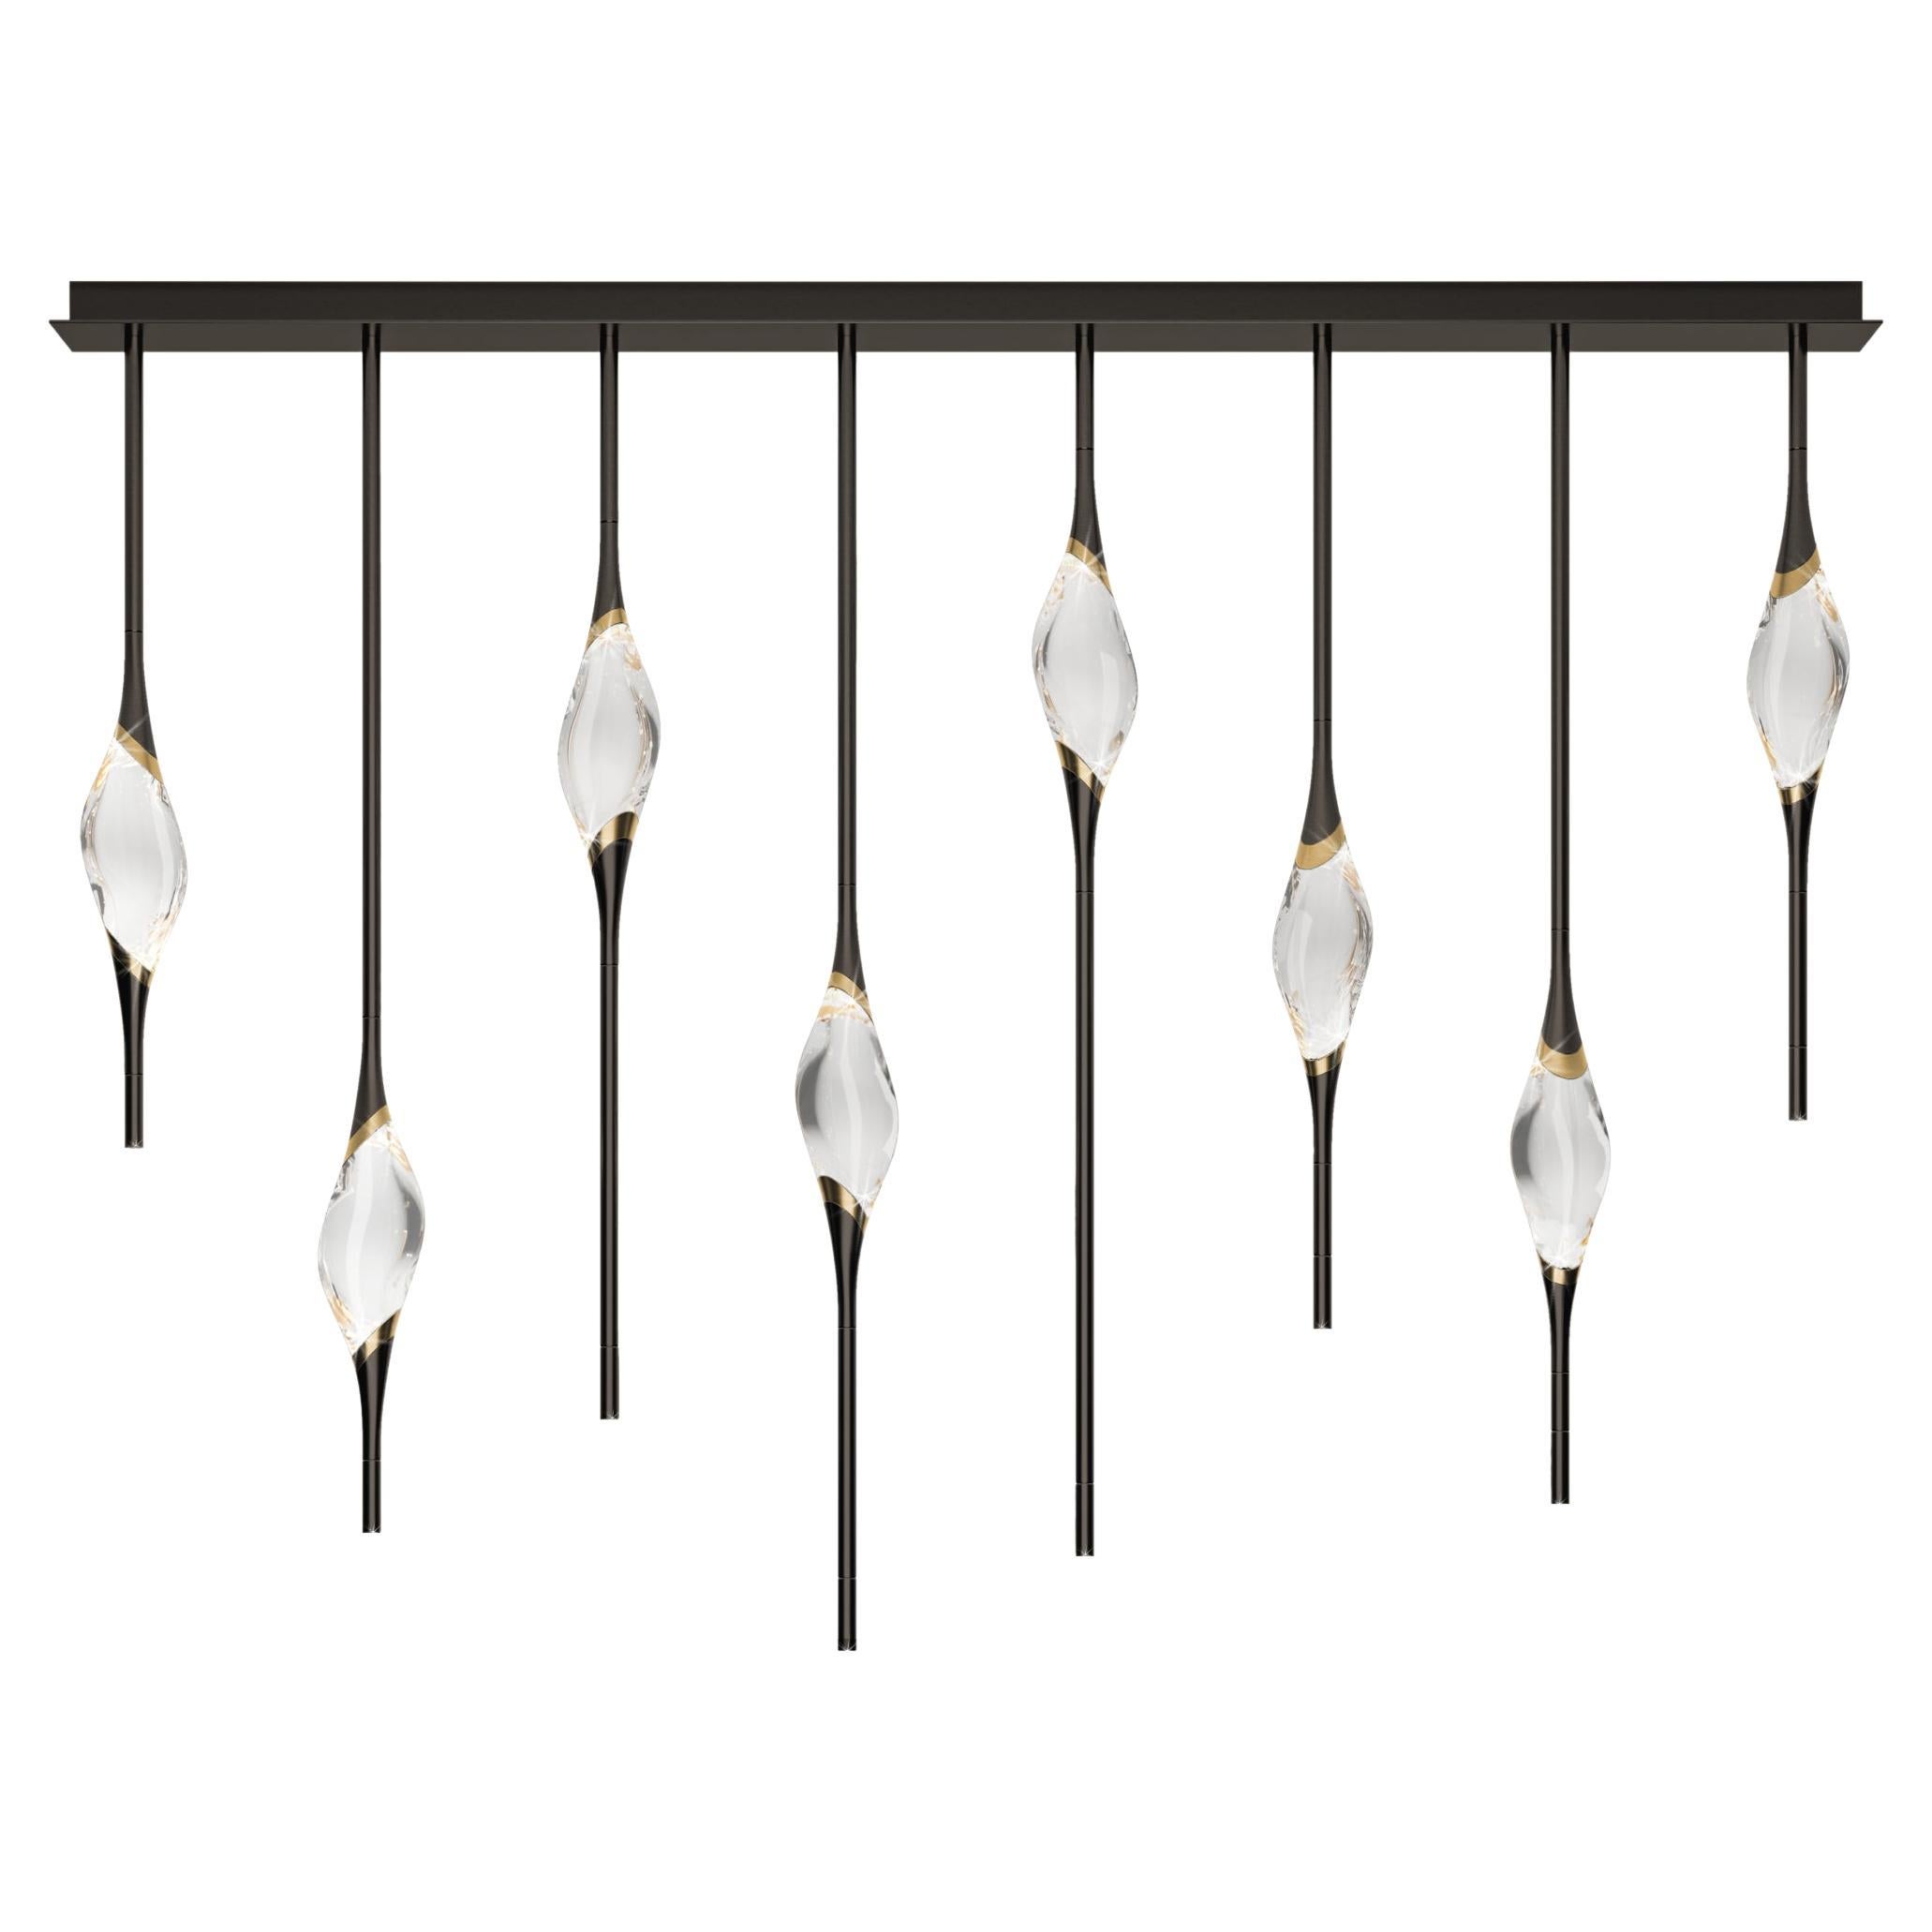 "Il Pezzo 12 Staggered Chandelier" - length 160cm/63” - black and polished brass For Sale